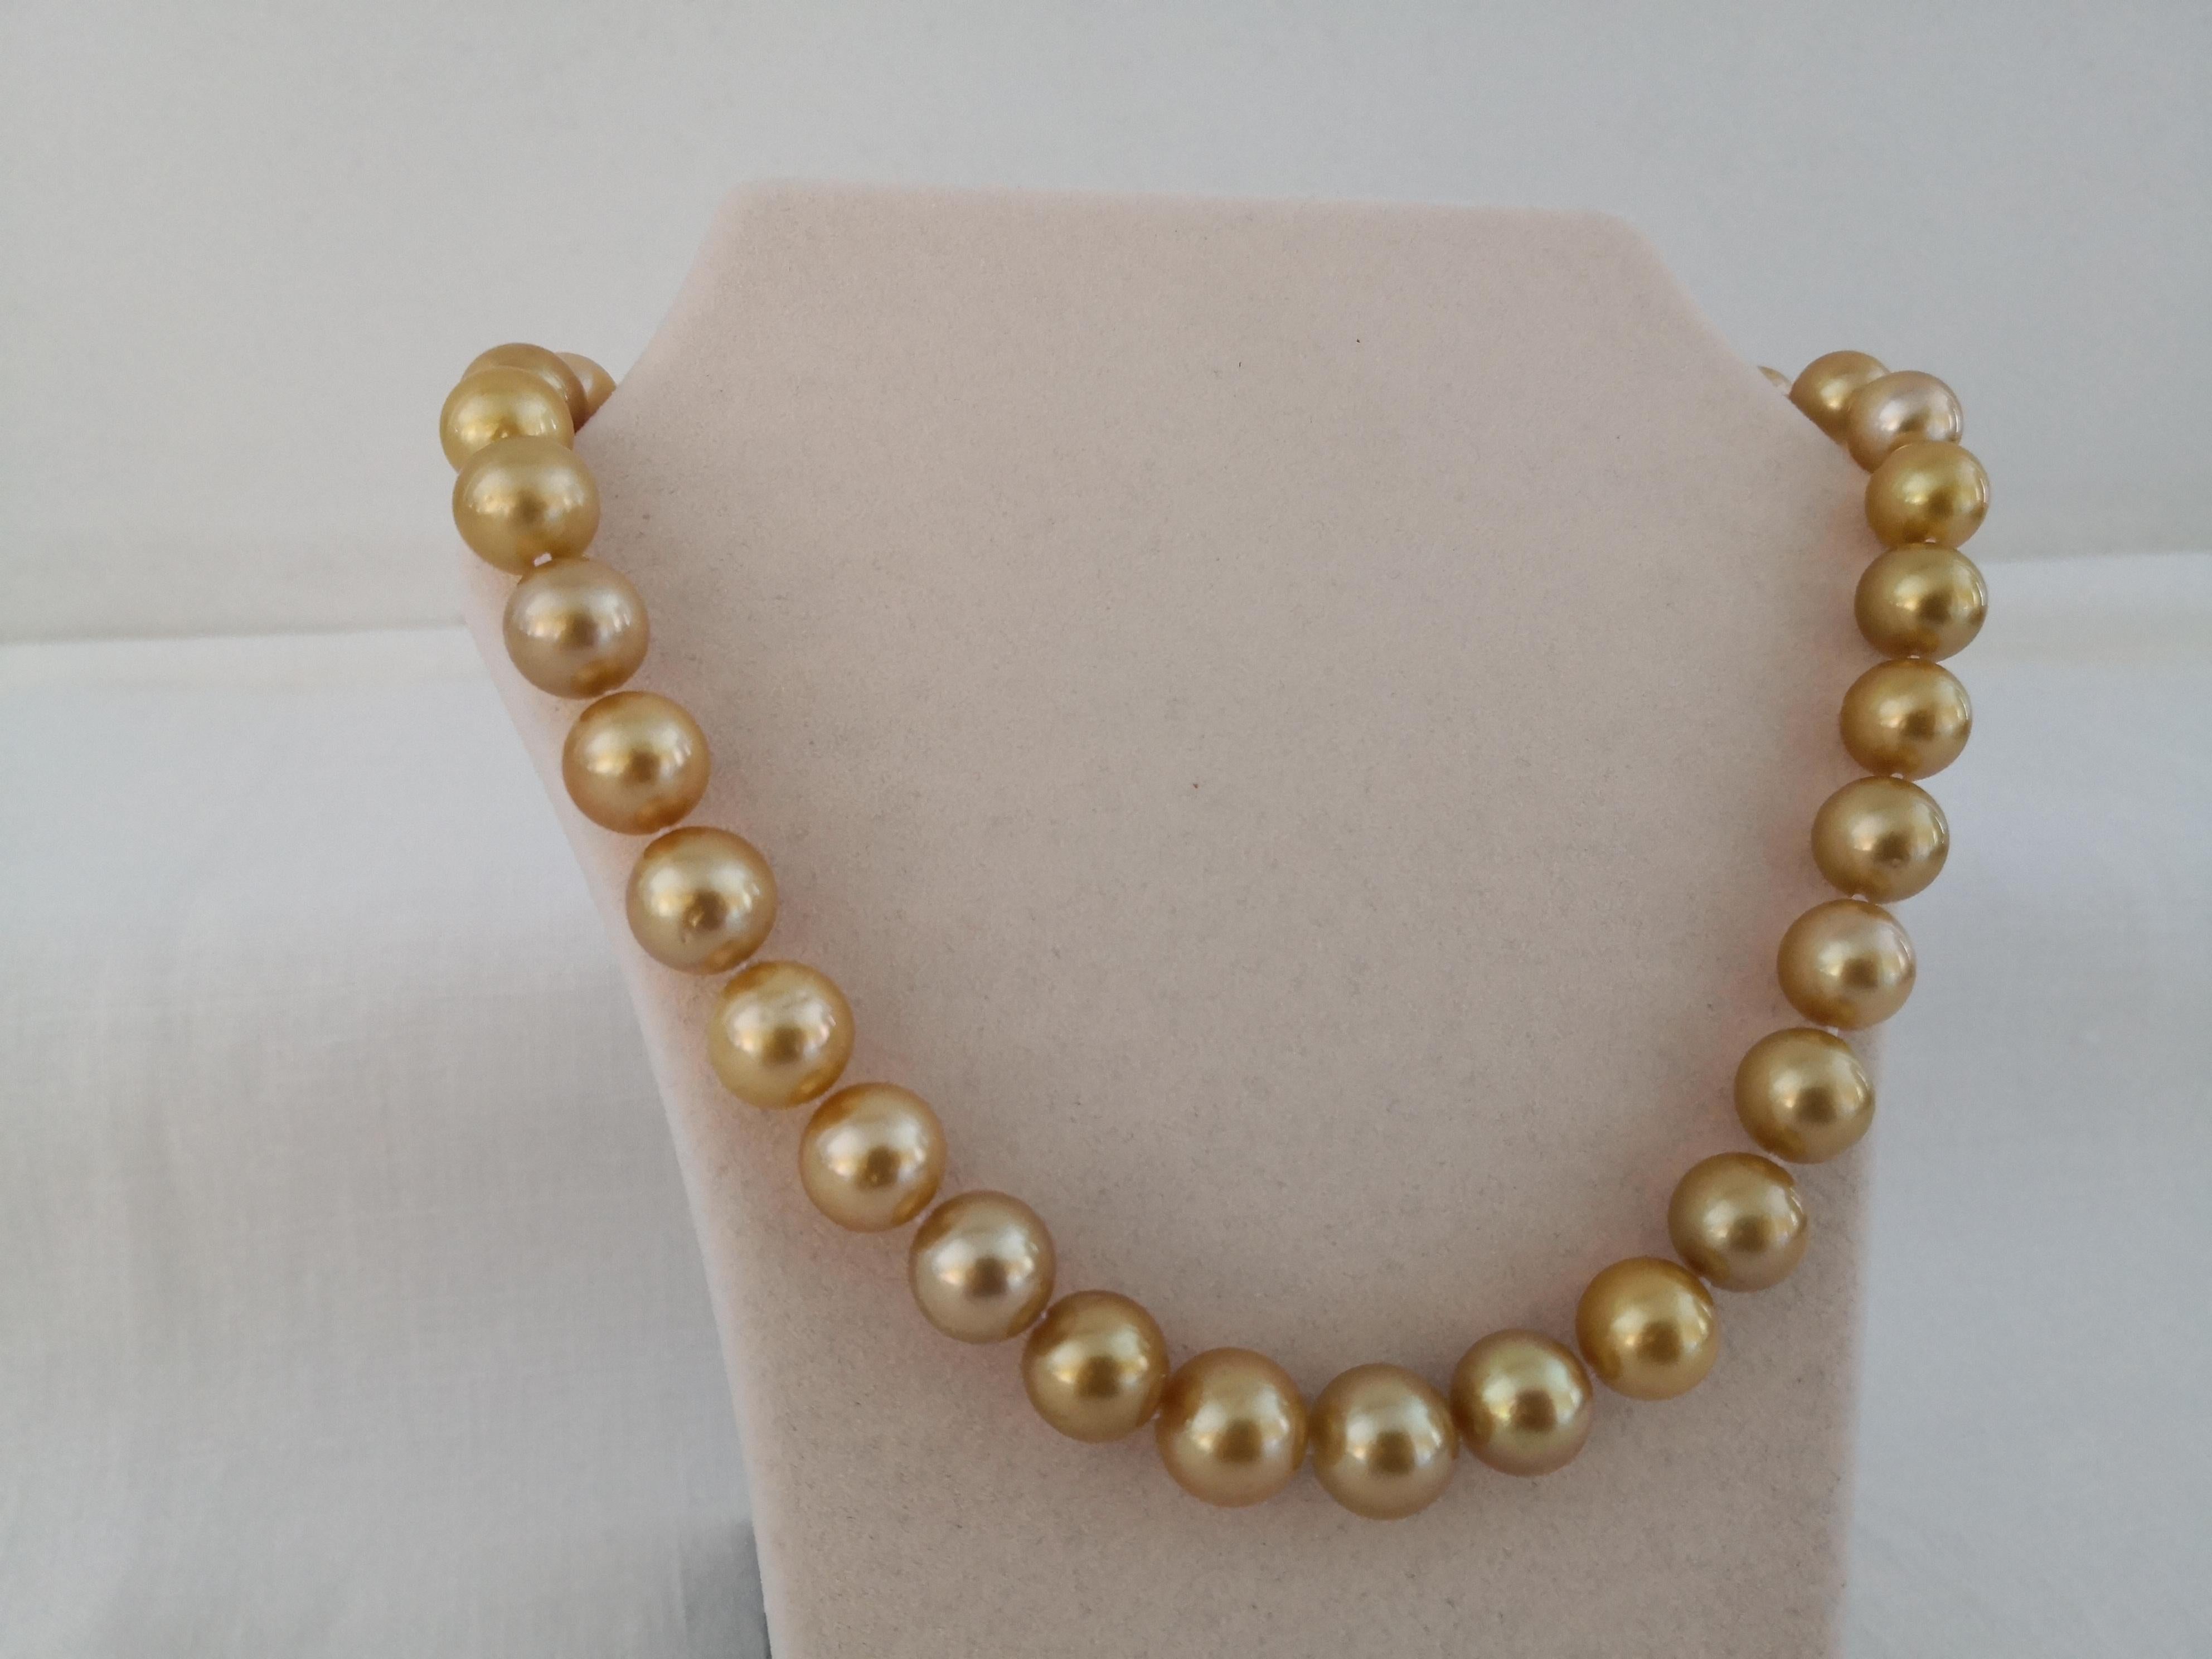 A Natural Color South Sea Pearls, from Indonesia ocean waters.  A Deep Golden Color Pearls necklace, This color is rare and unique and is considered the most expensive one among South Sea Pearl.   This color is also known as 